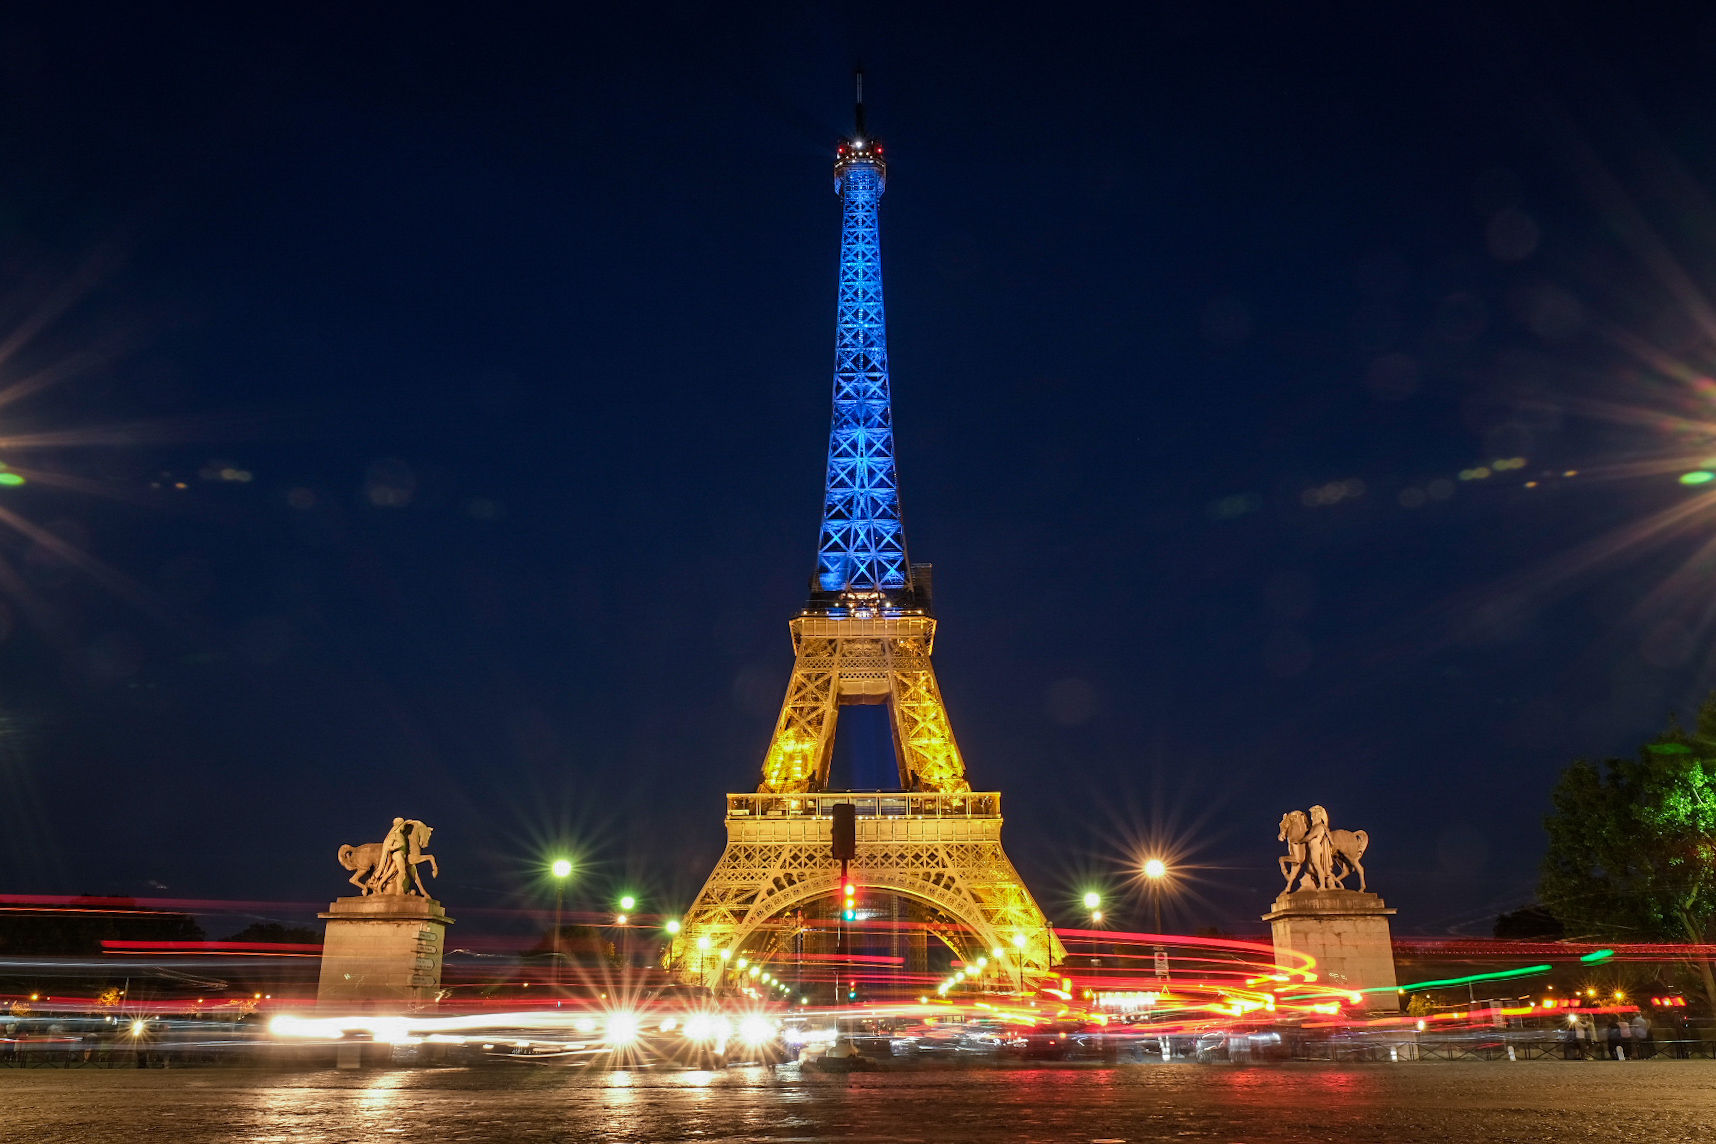 On Europe Day, Eiffel Tower shines bright in solidarity with Ukraine